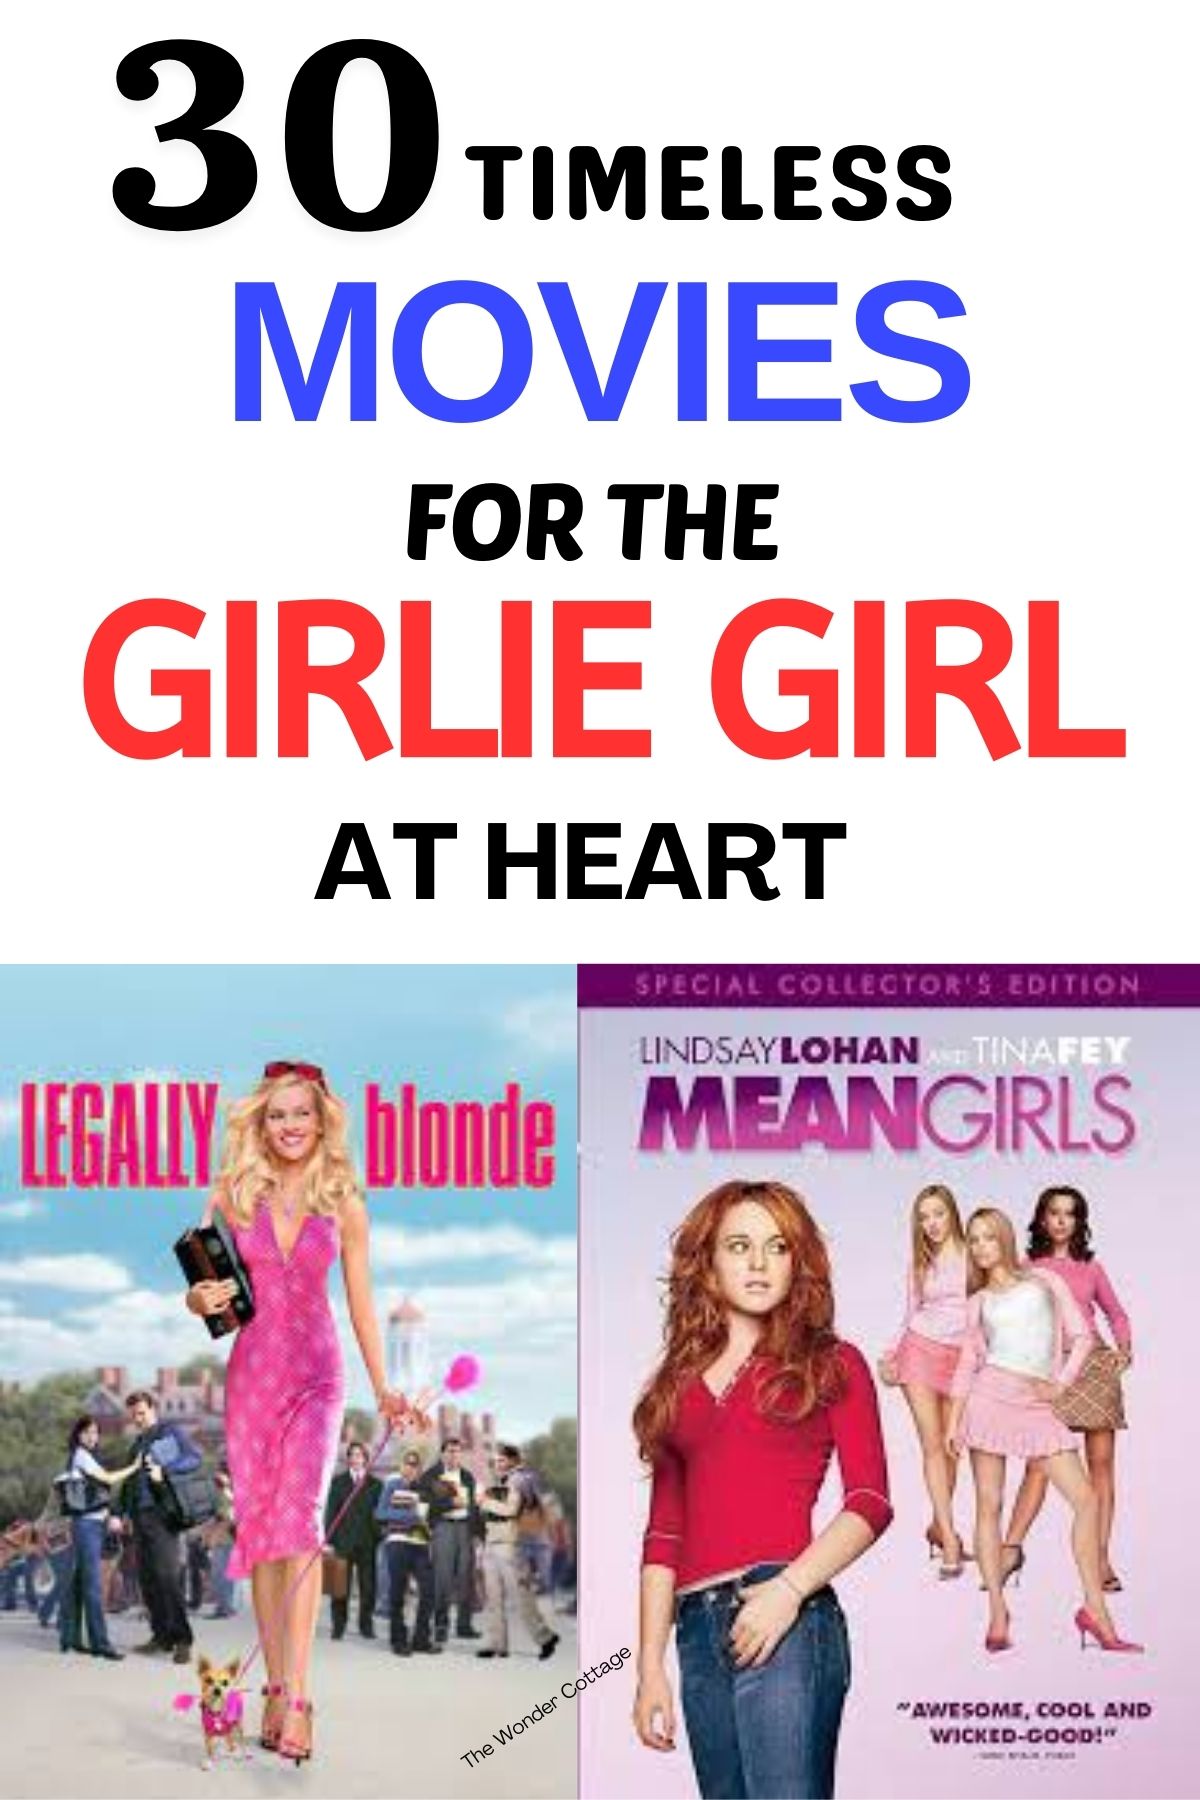 30 Timeless Movies For The Girlie Girl At Heart